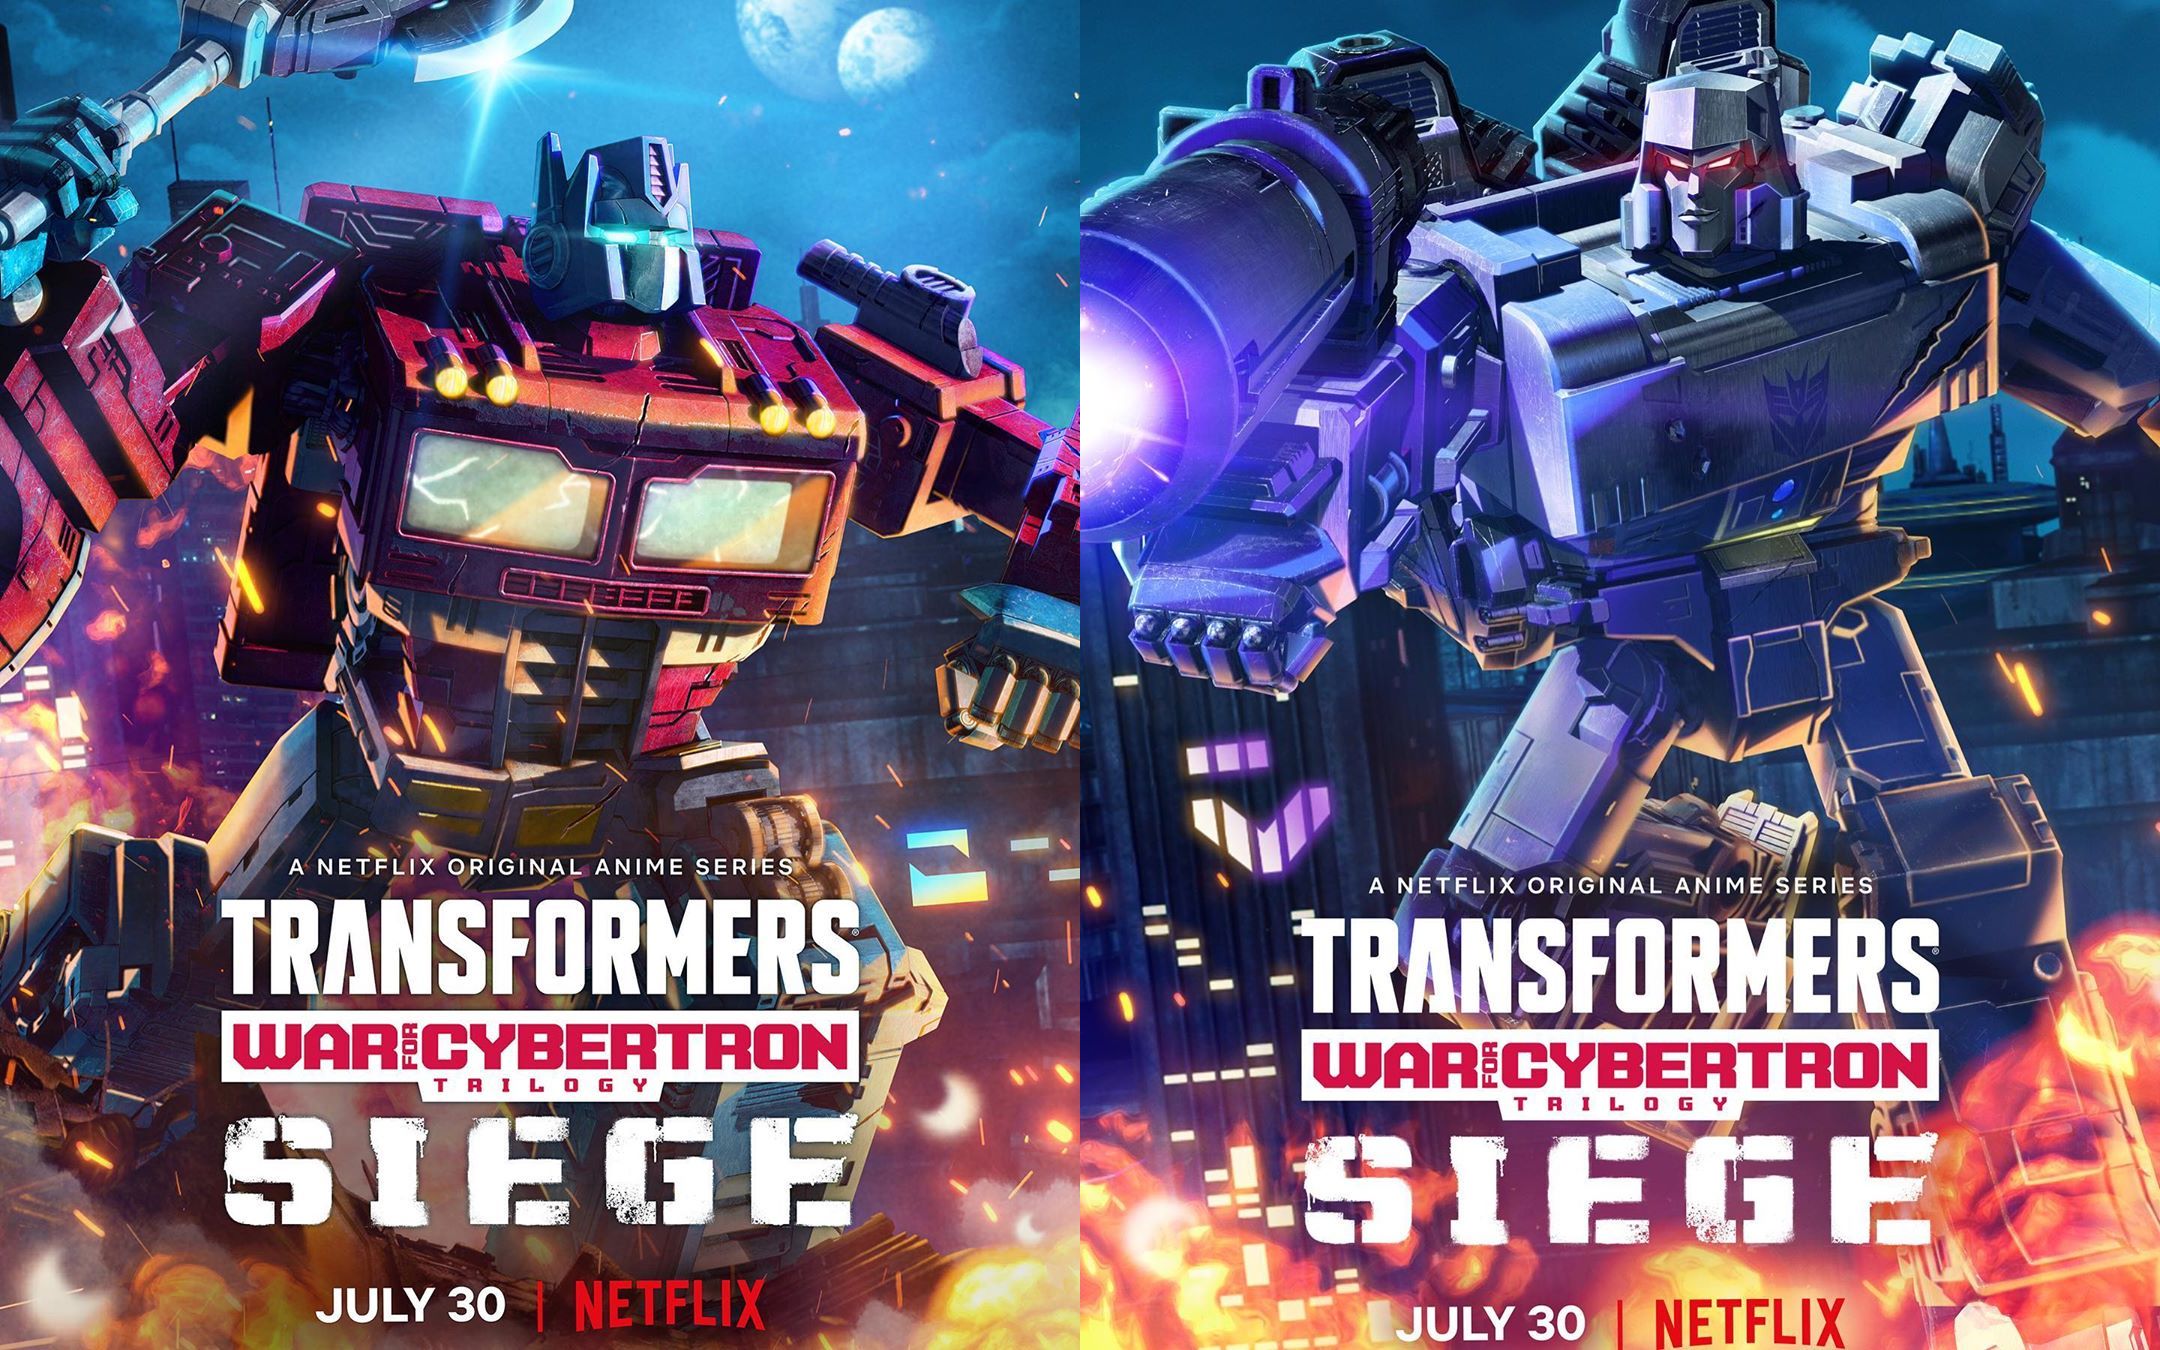 Netflix's War For Cybertron Promotional Posters